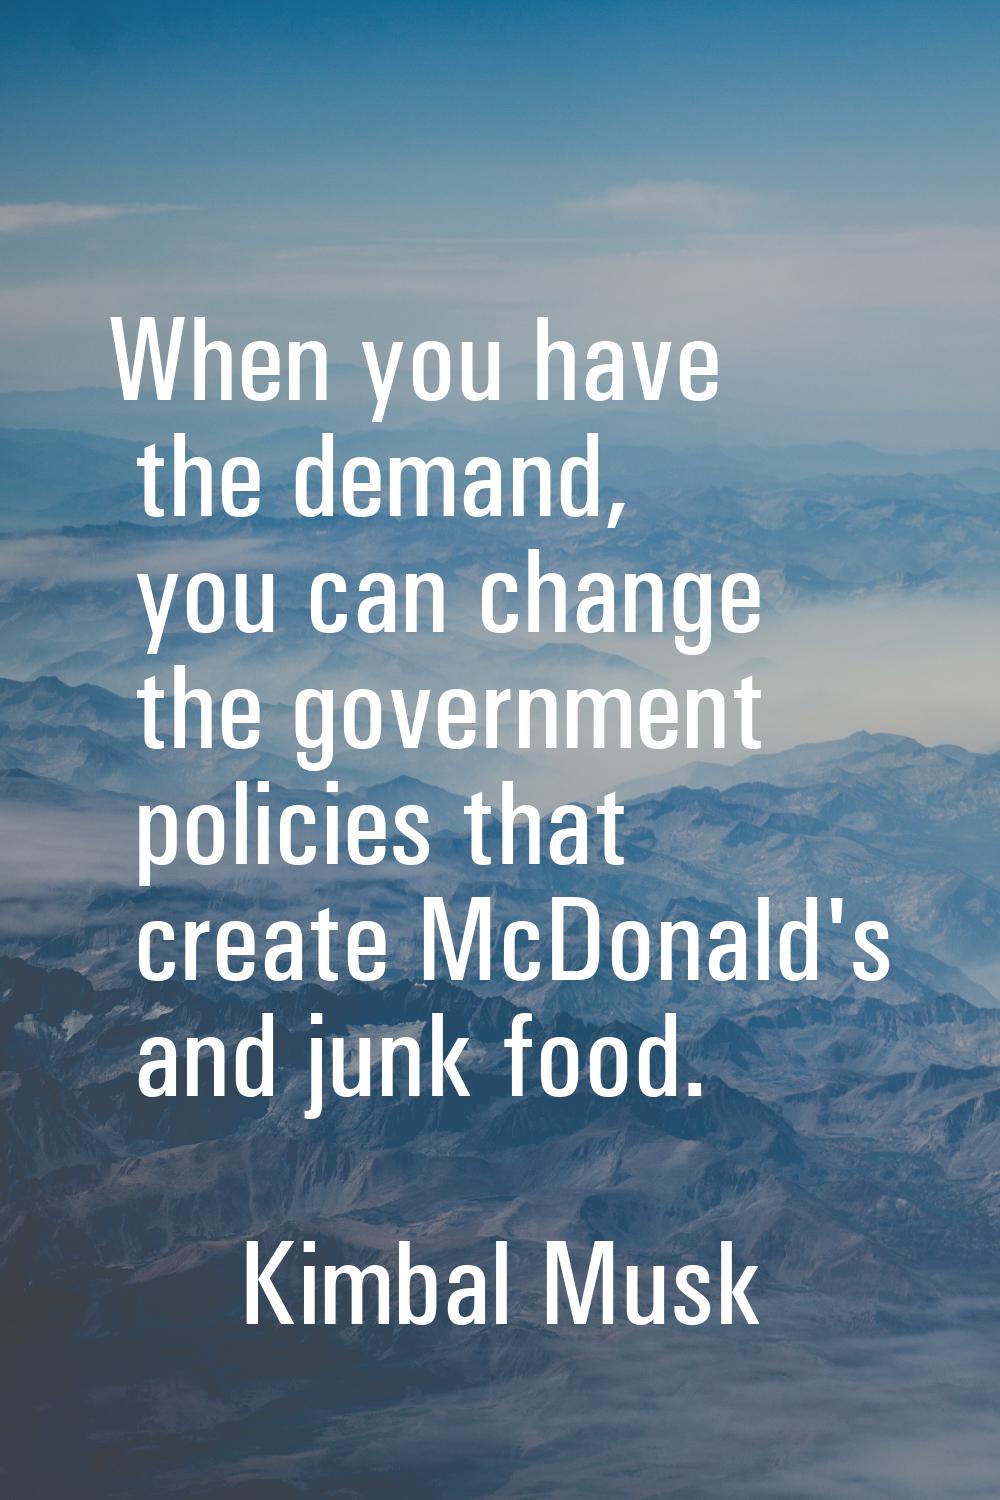 When you have the demand, you can change the government policies that create McDonald's and junk fo